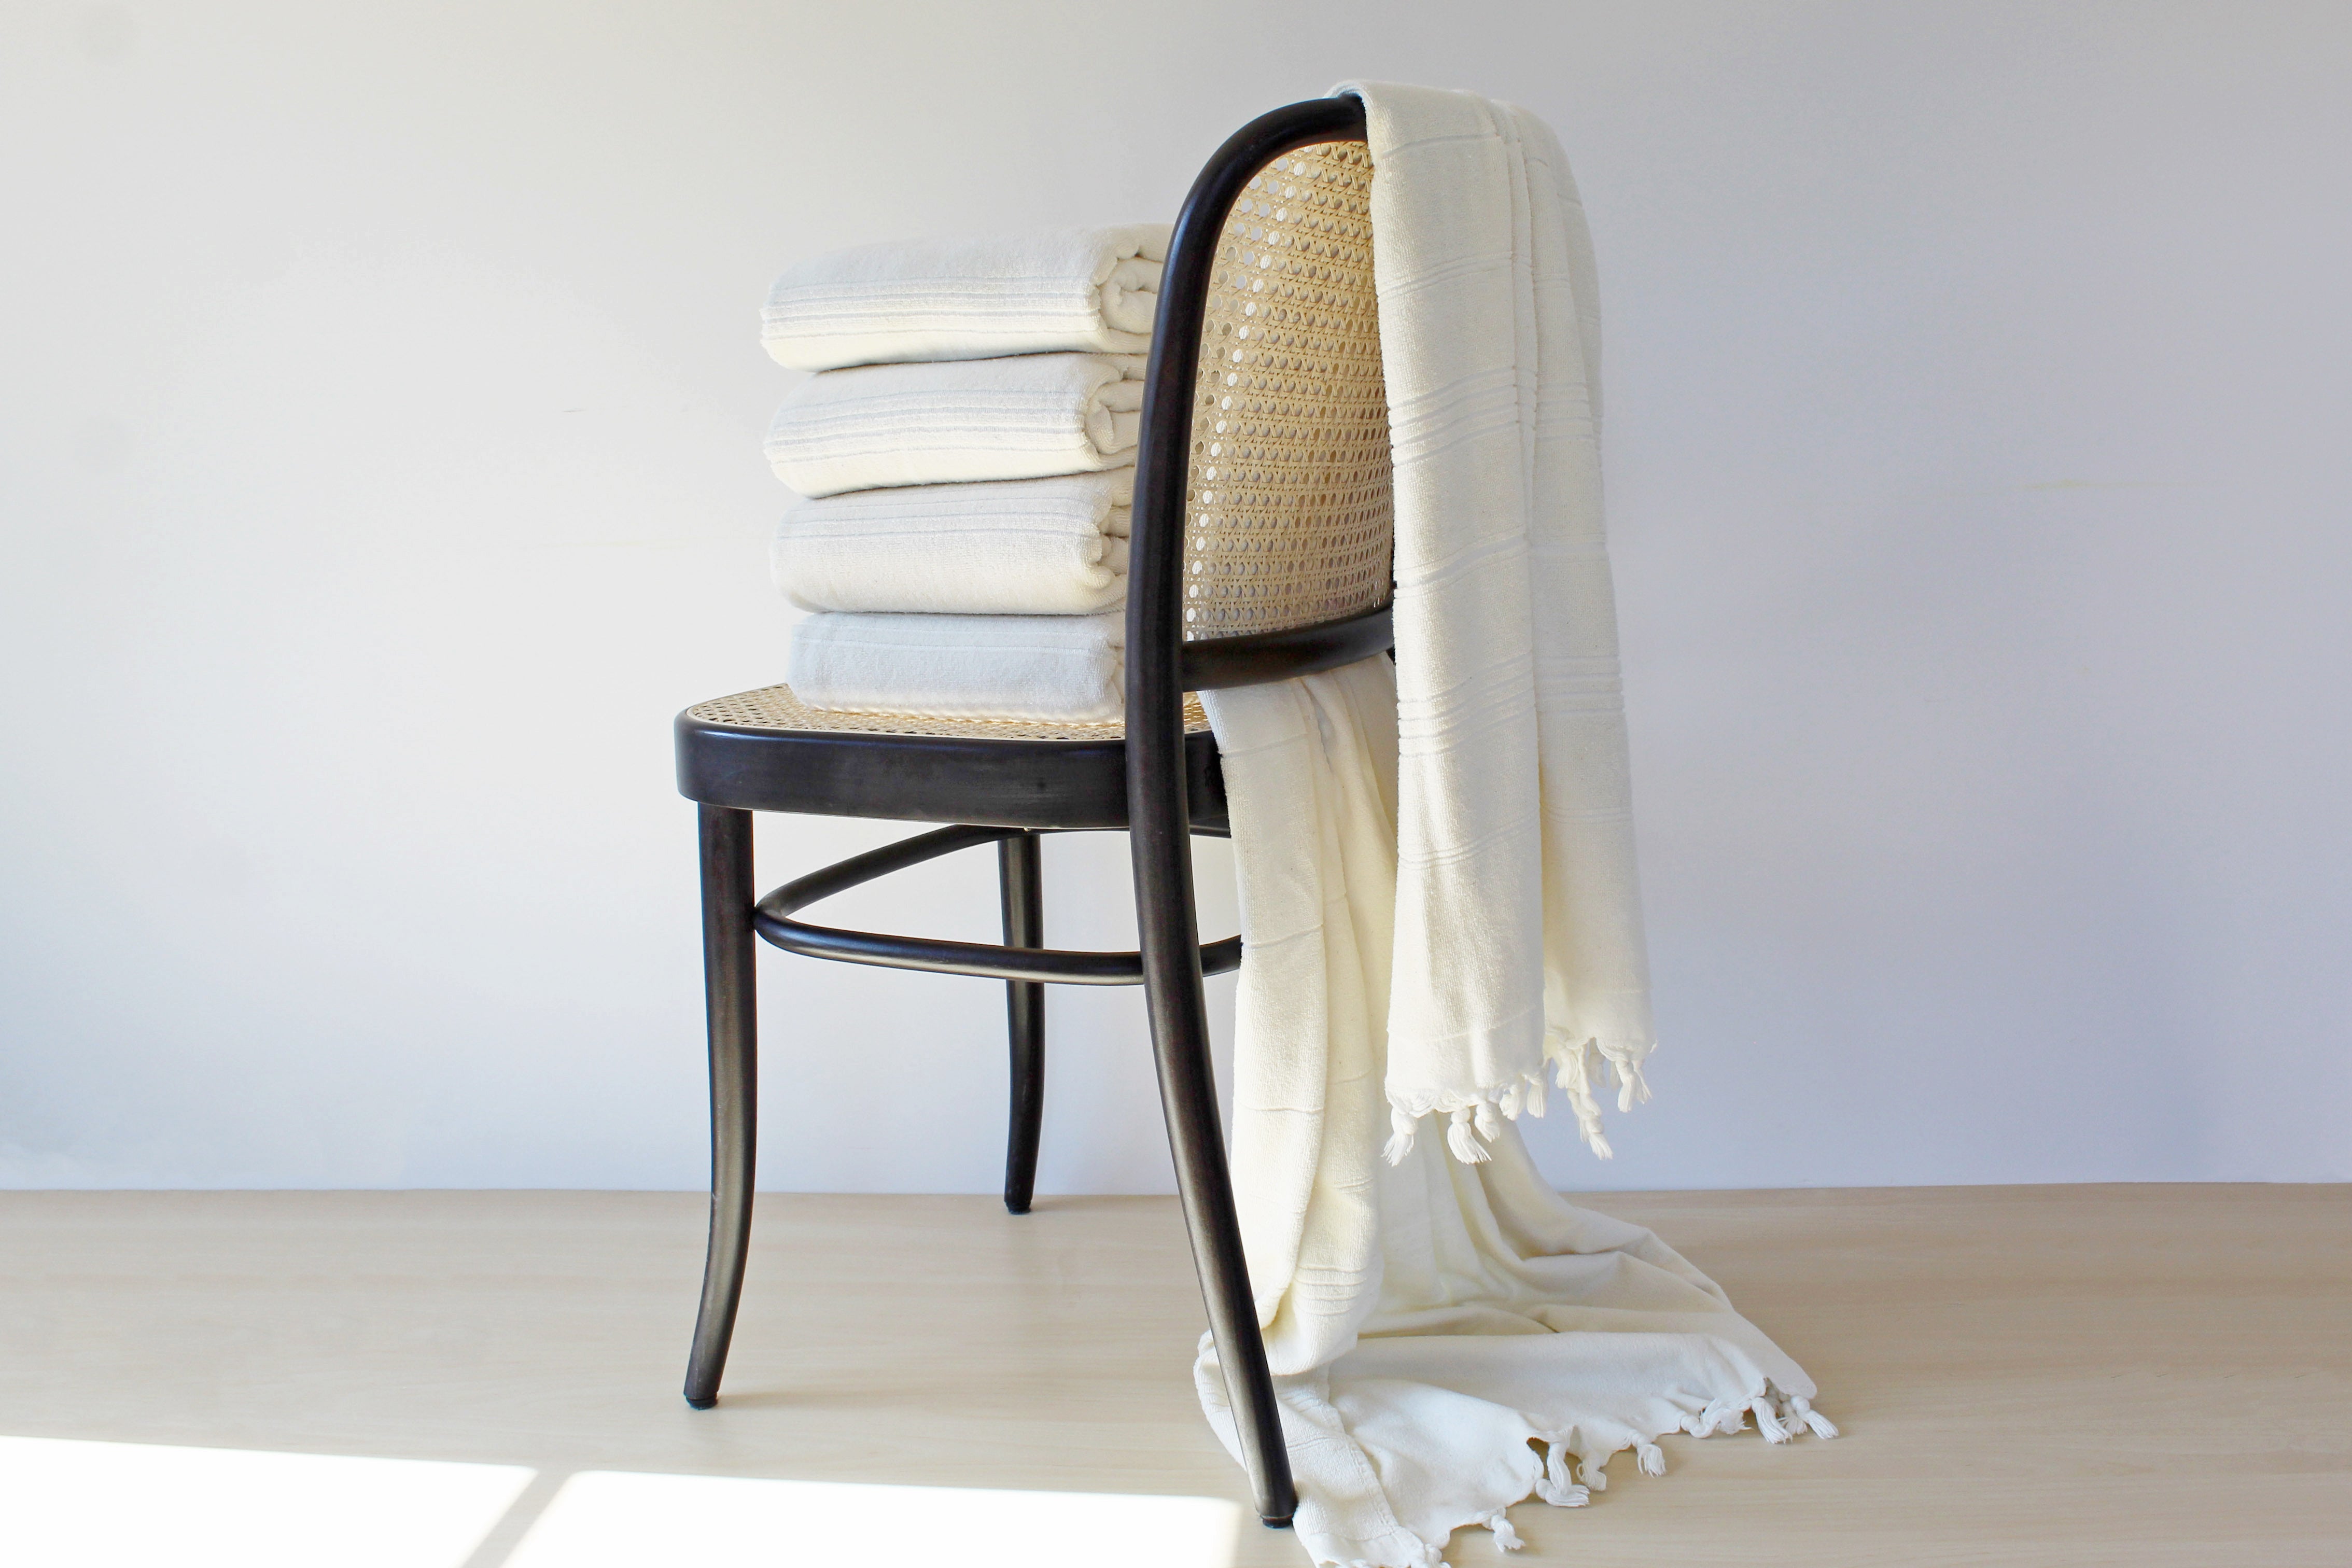 The Difference Between Turkish Towels and Regular Towels